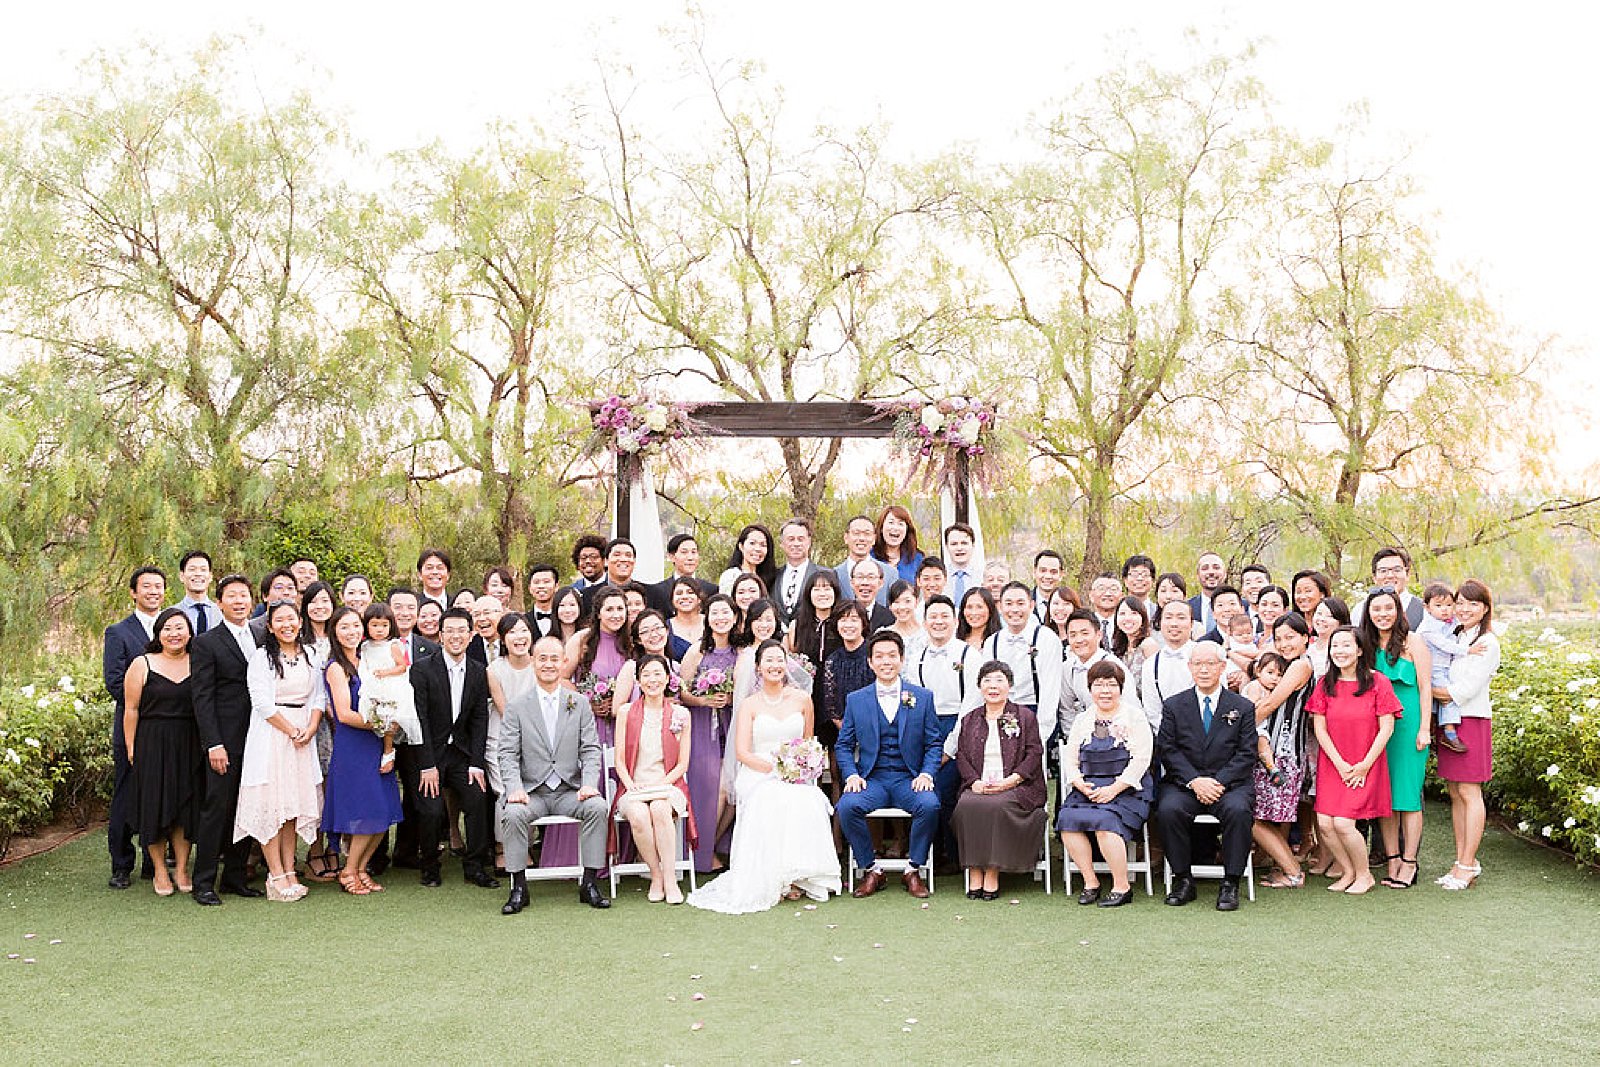 family portrait at wedding day by Randi Michelle Photography